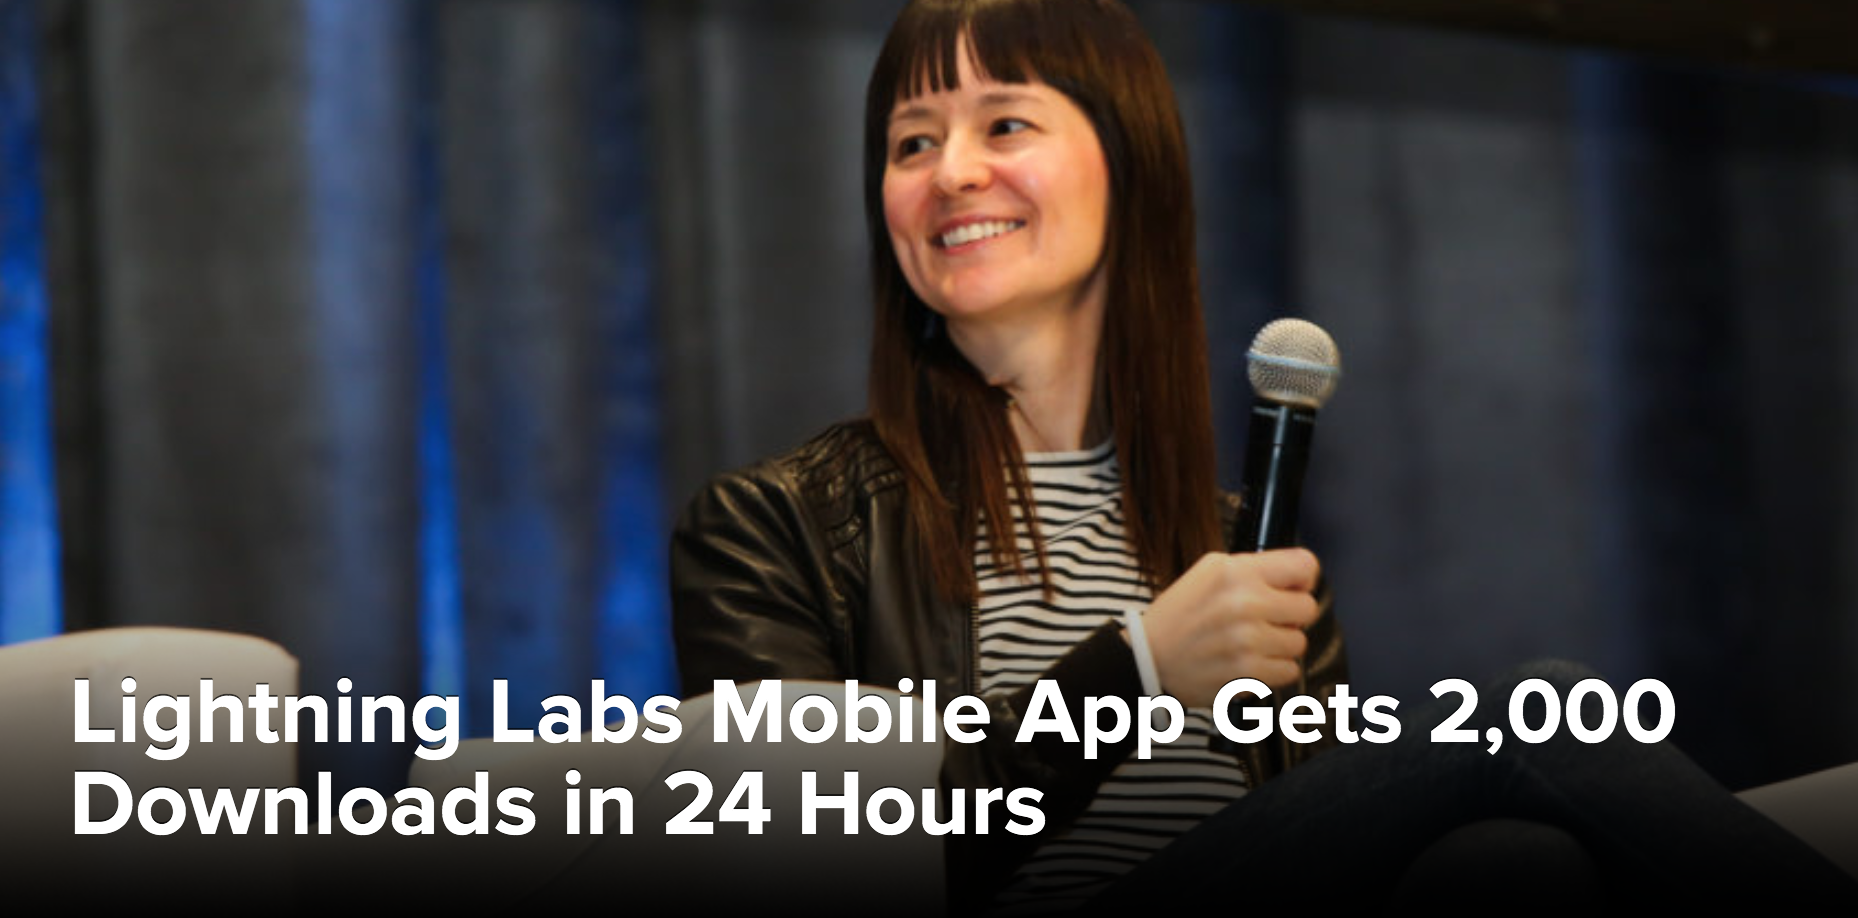 Bitcoin’s Lightning Labs Mobile App Gets 2,000 Downloads In 24 Hours (#GotBitcoin?)